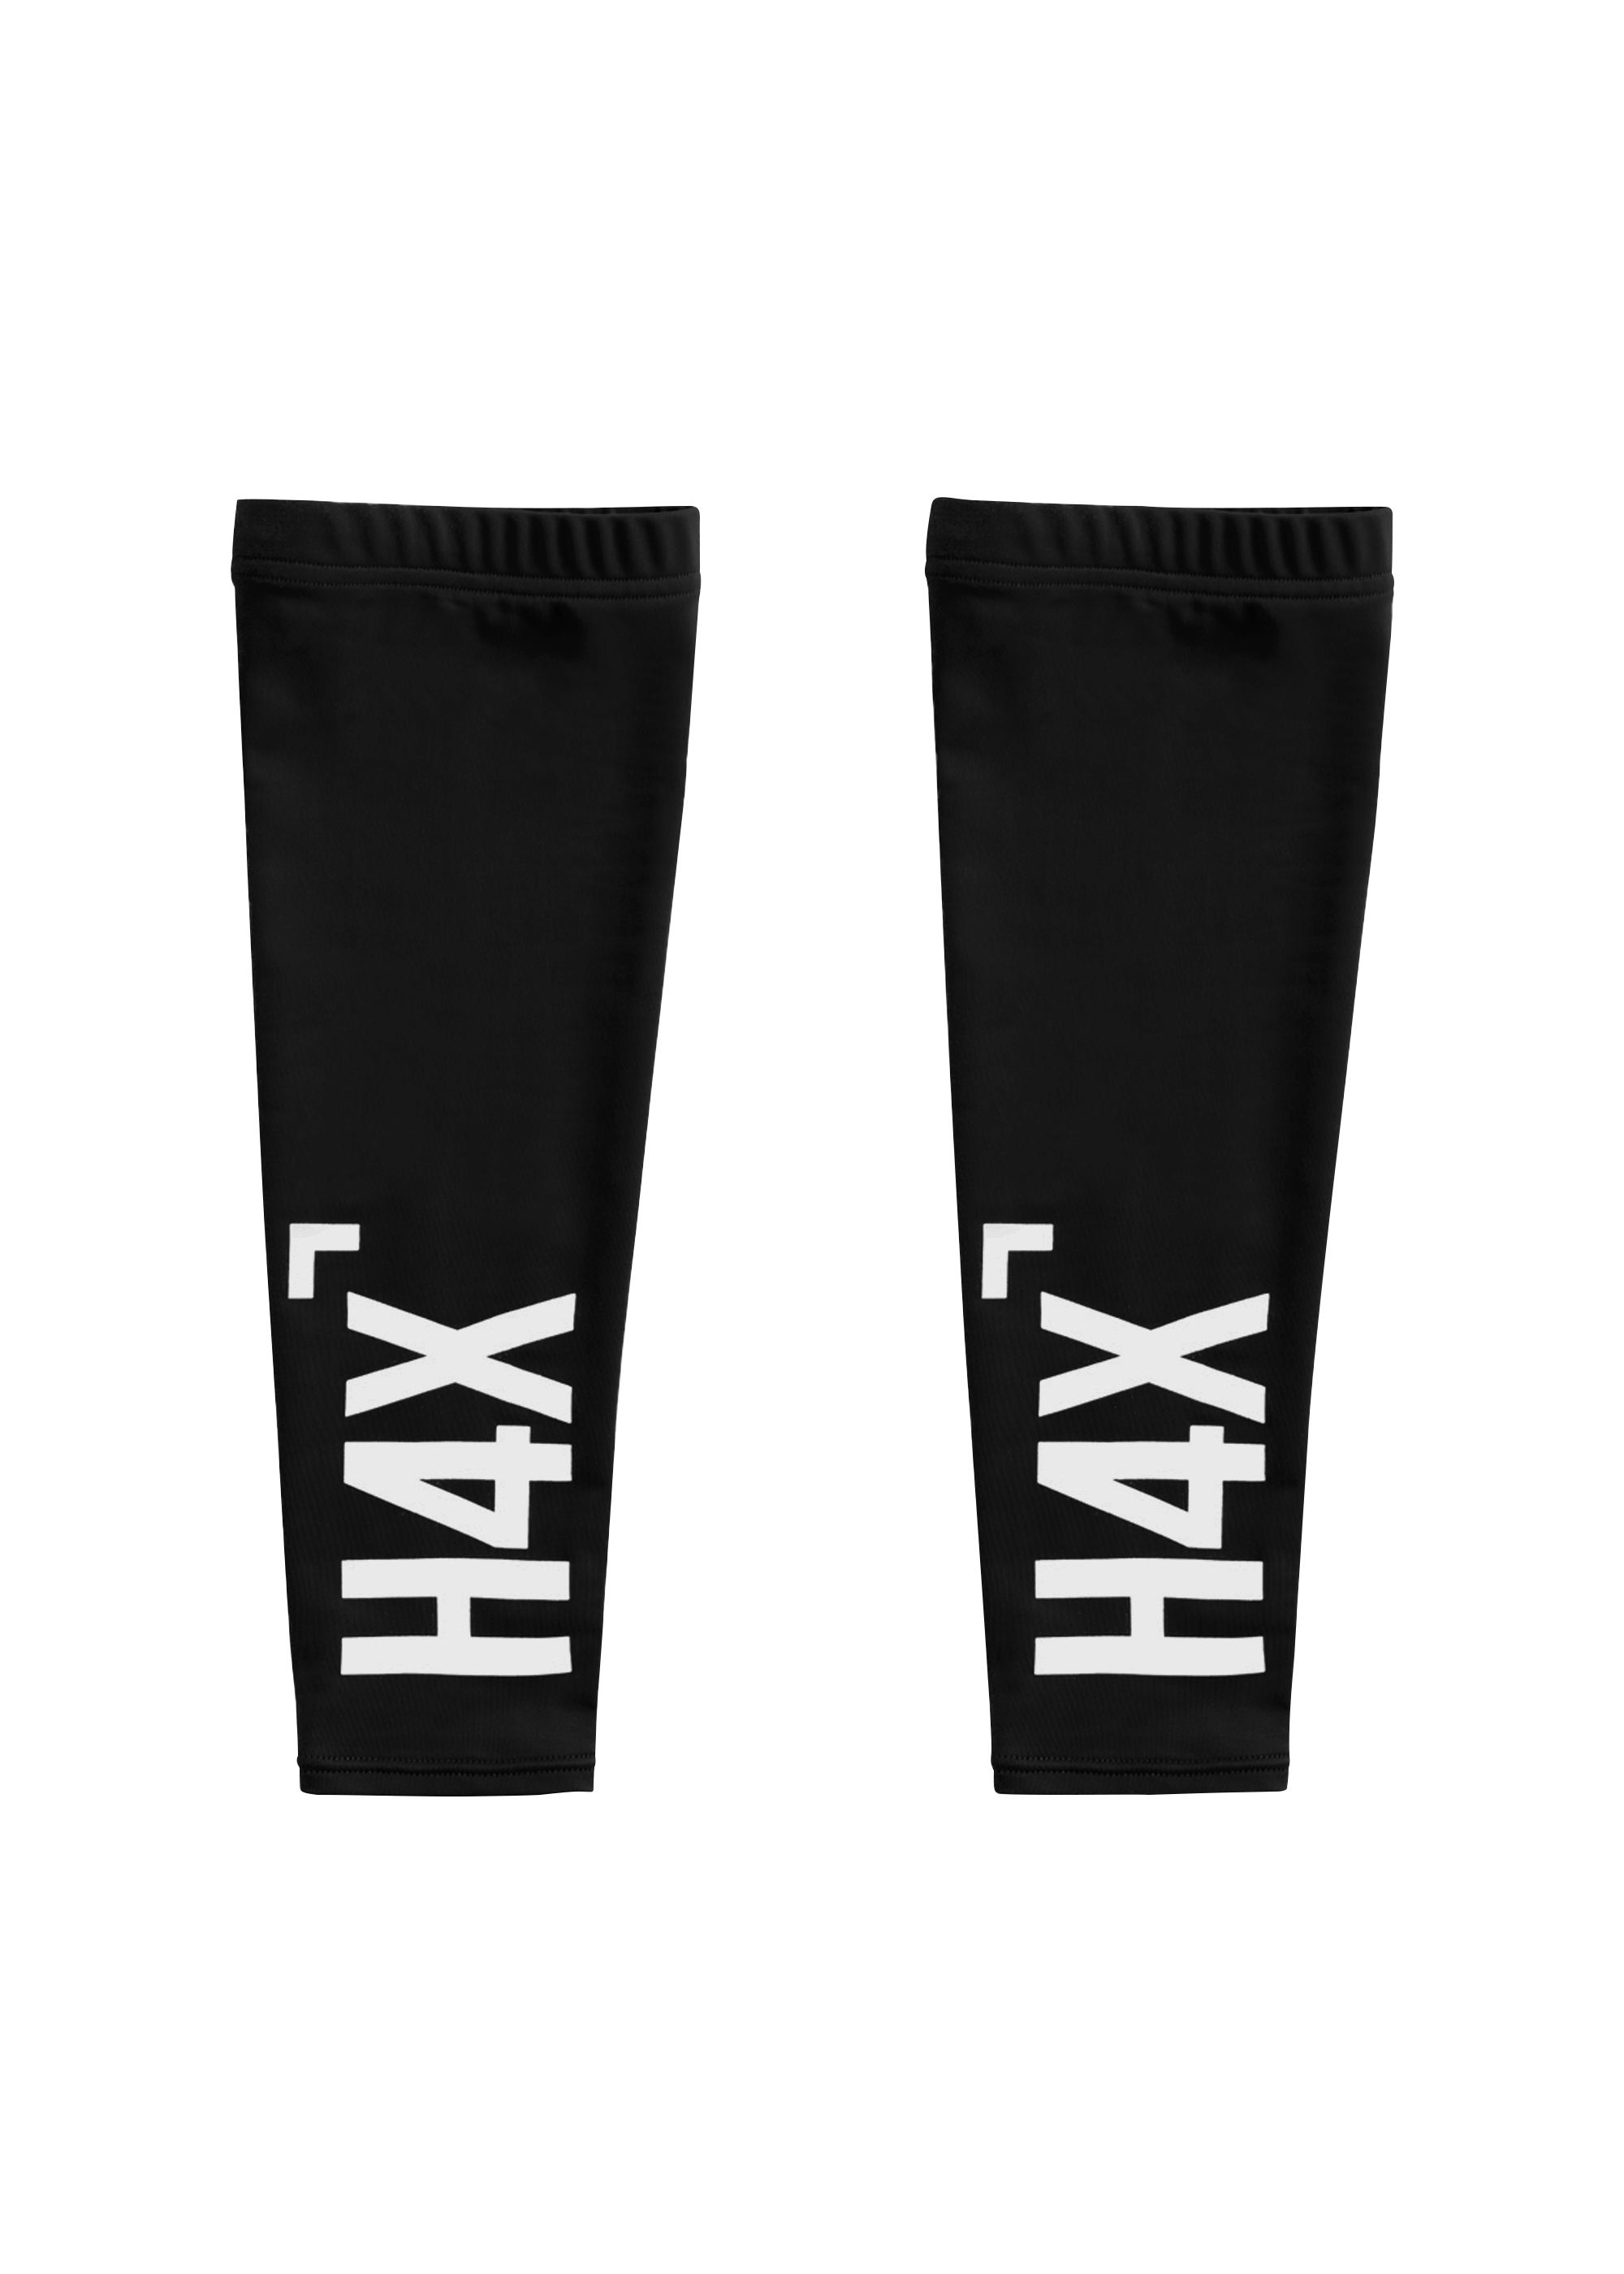 H4X PRO SLEEVES  Sleeves, Clothes design, Man shop